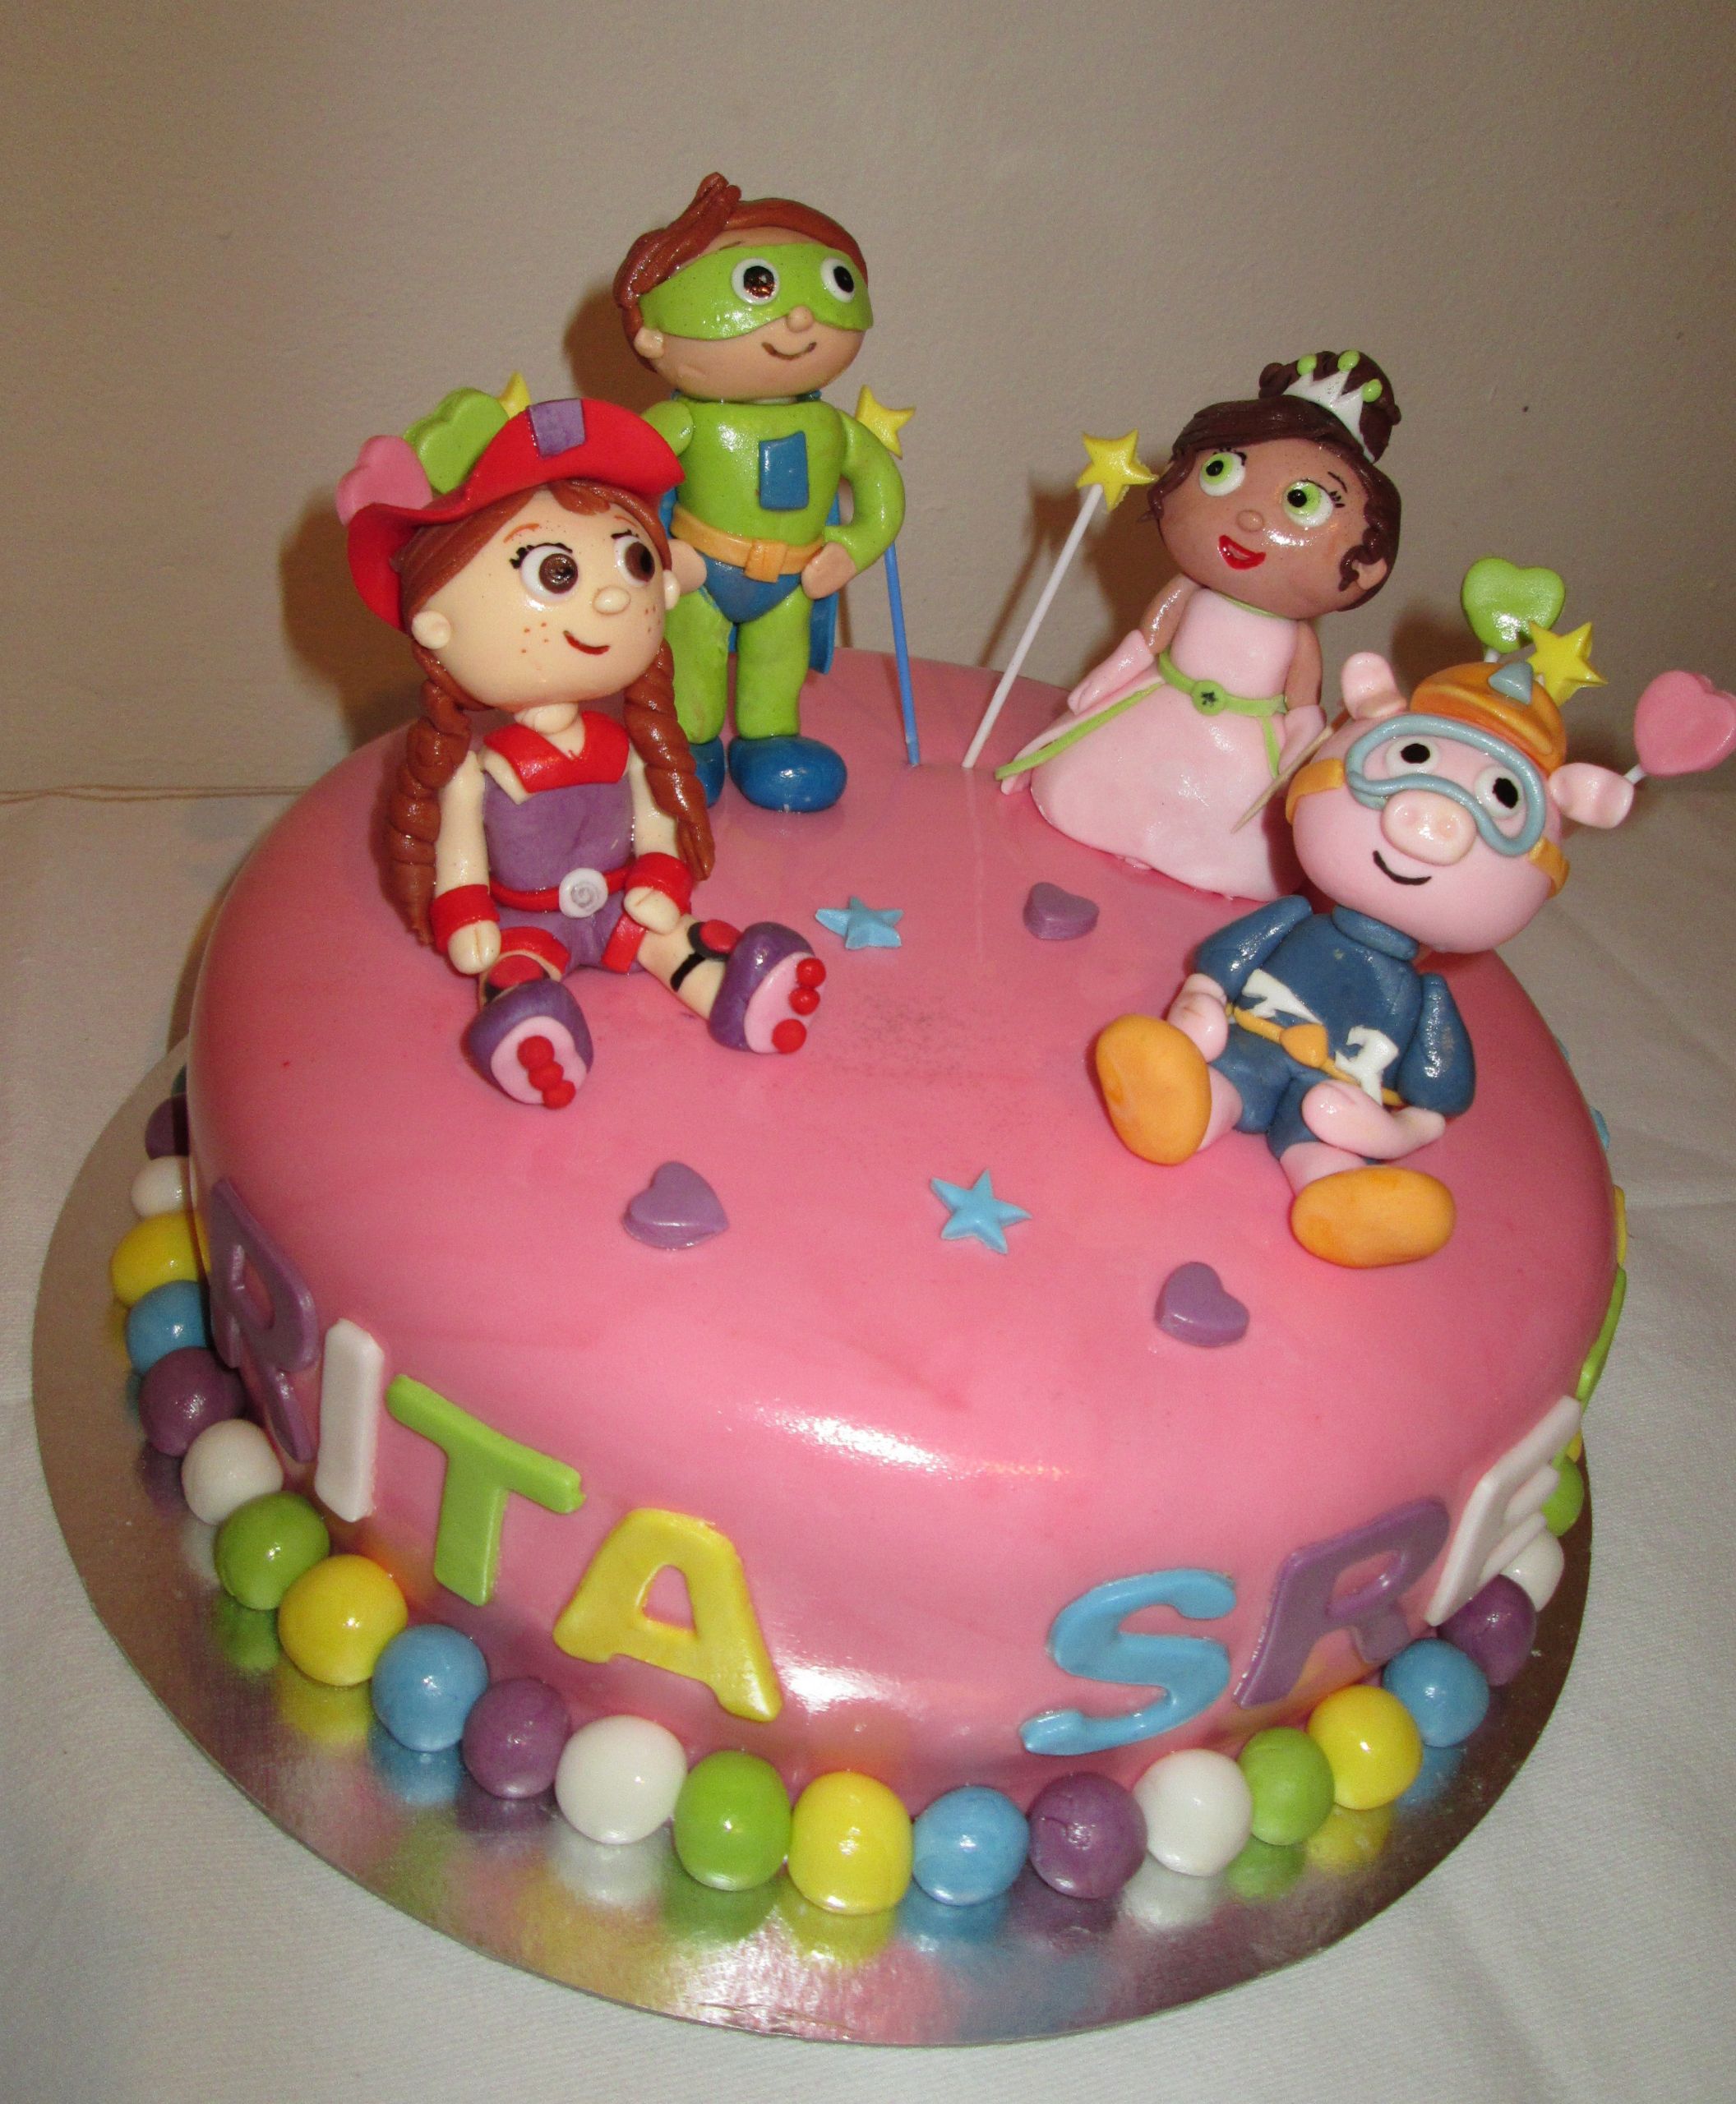 Super Why Birthday Cake
 Birthday Cake With Super Why Cartoon Characters